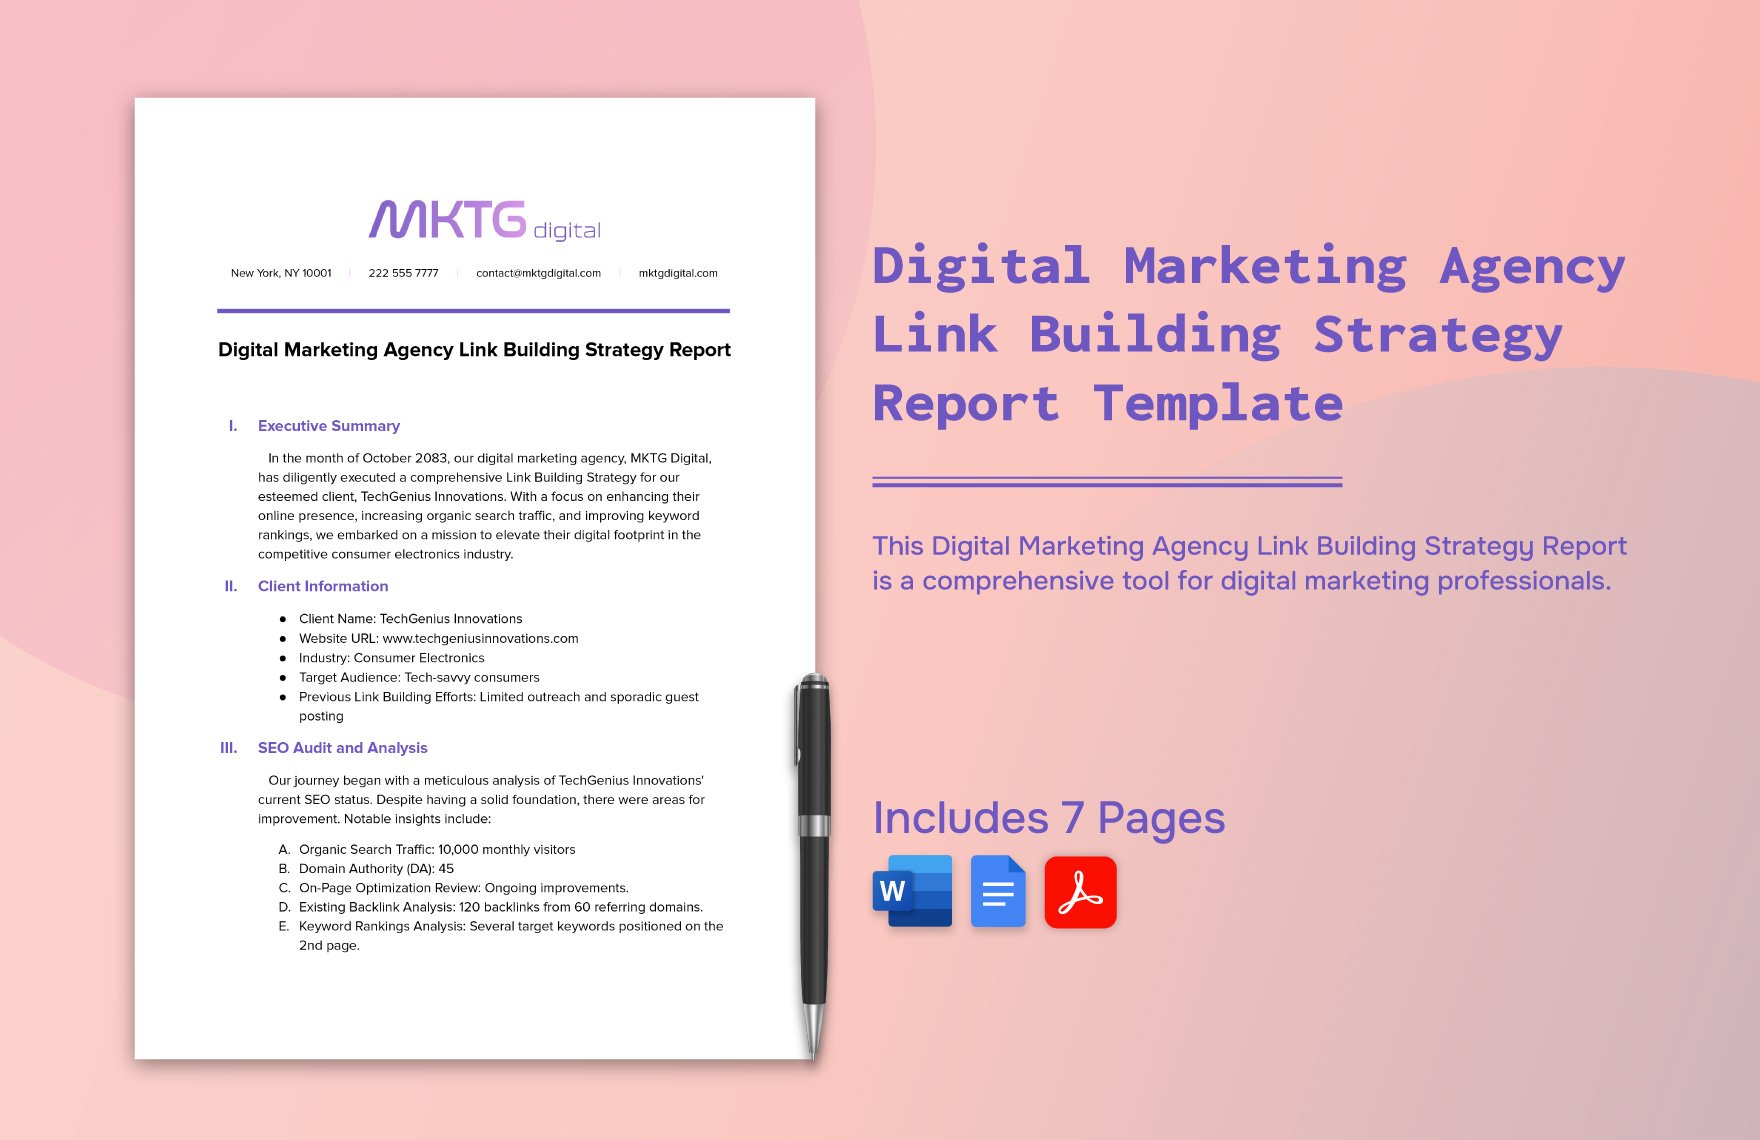 Digital Marketing Agency Link Building Strategy Report Template